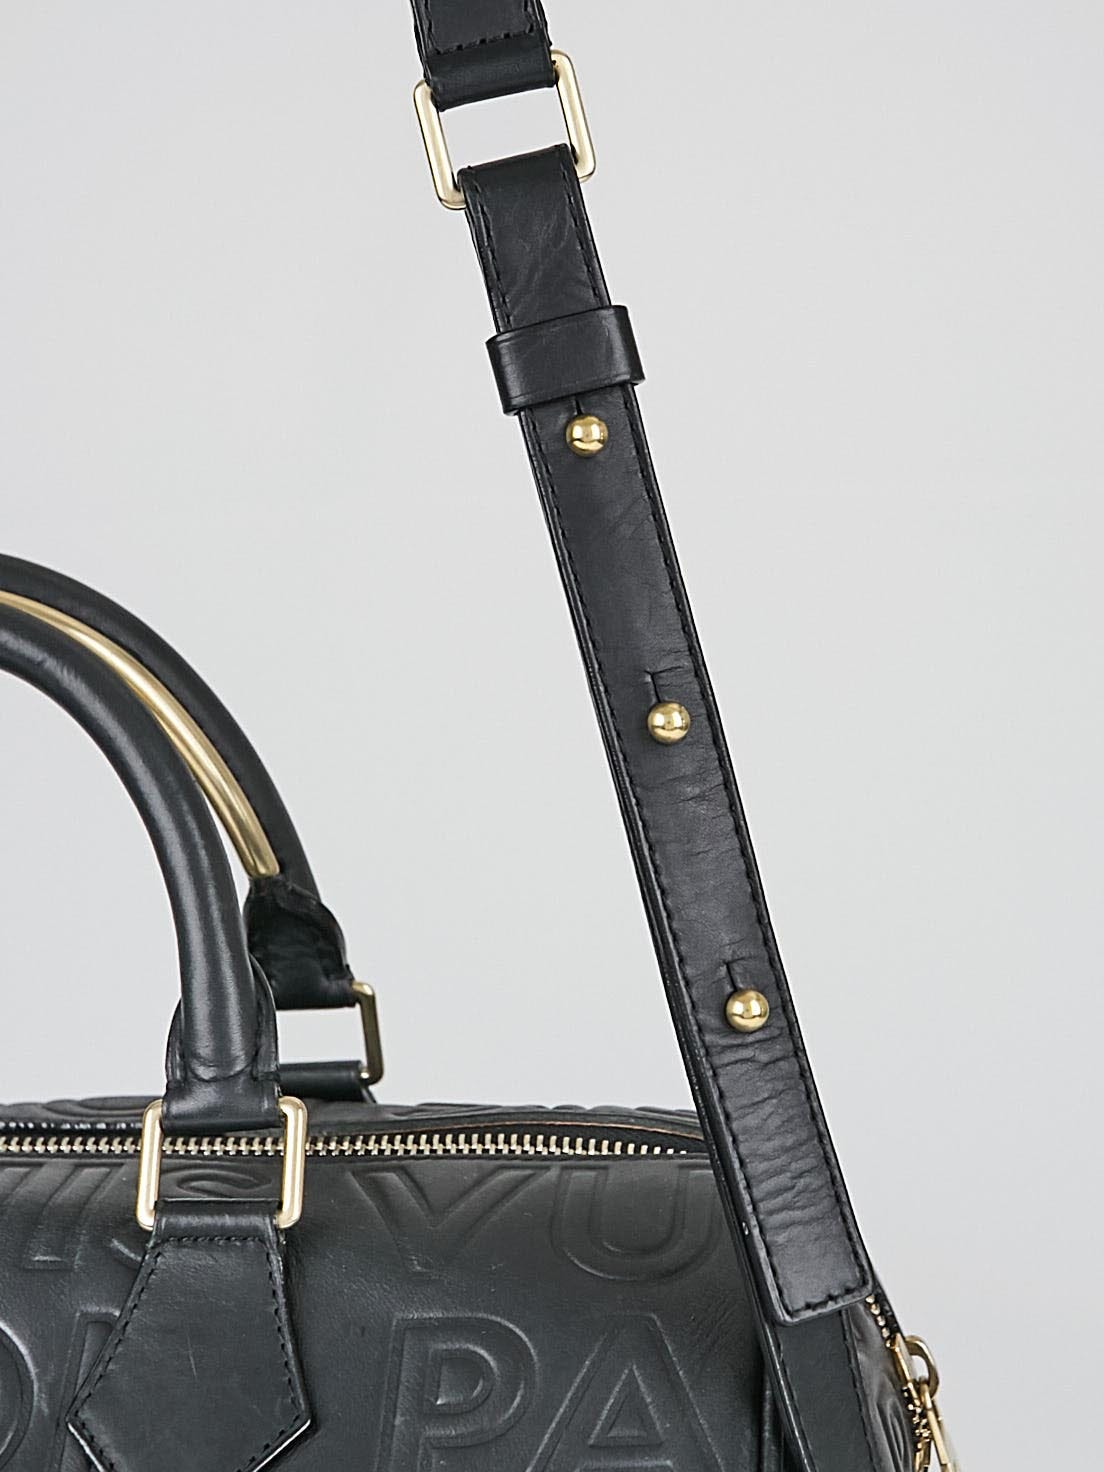 Louis Vuitton Limited Edition Black Embossed Leather Speedy Cube 30 Bag -  Yoogi's Closet